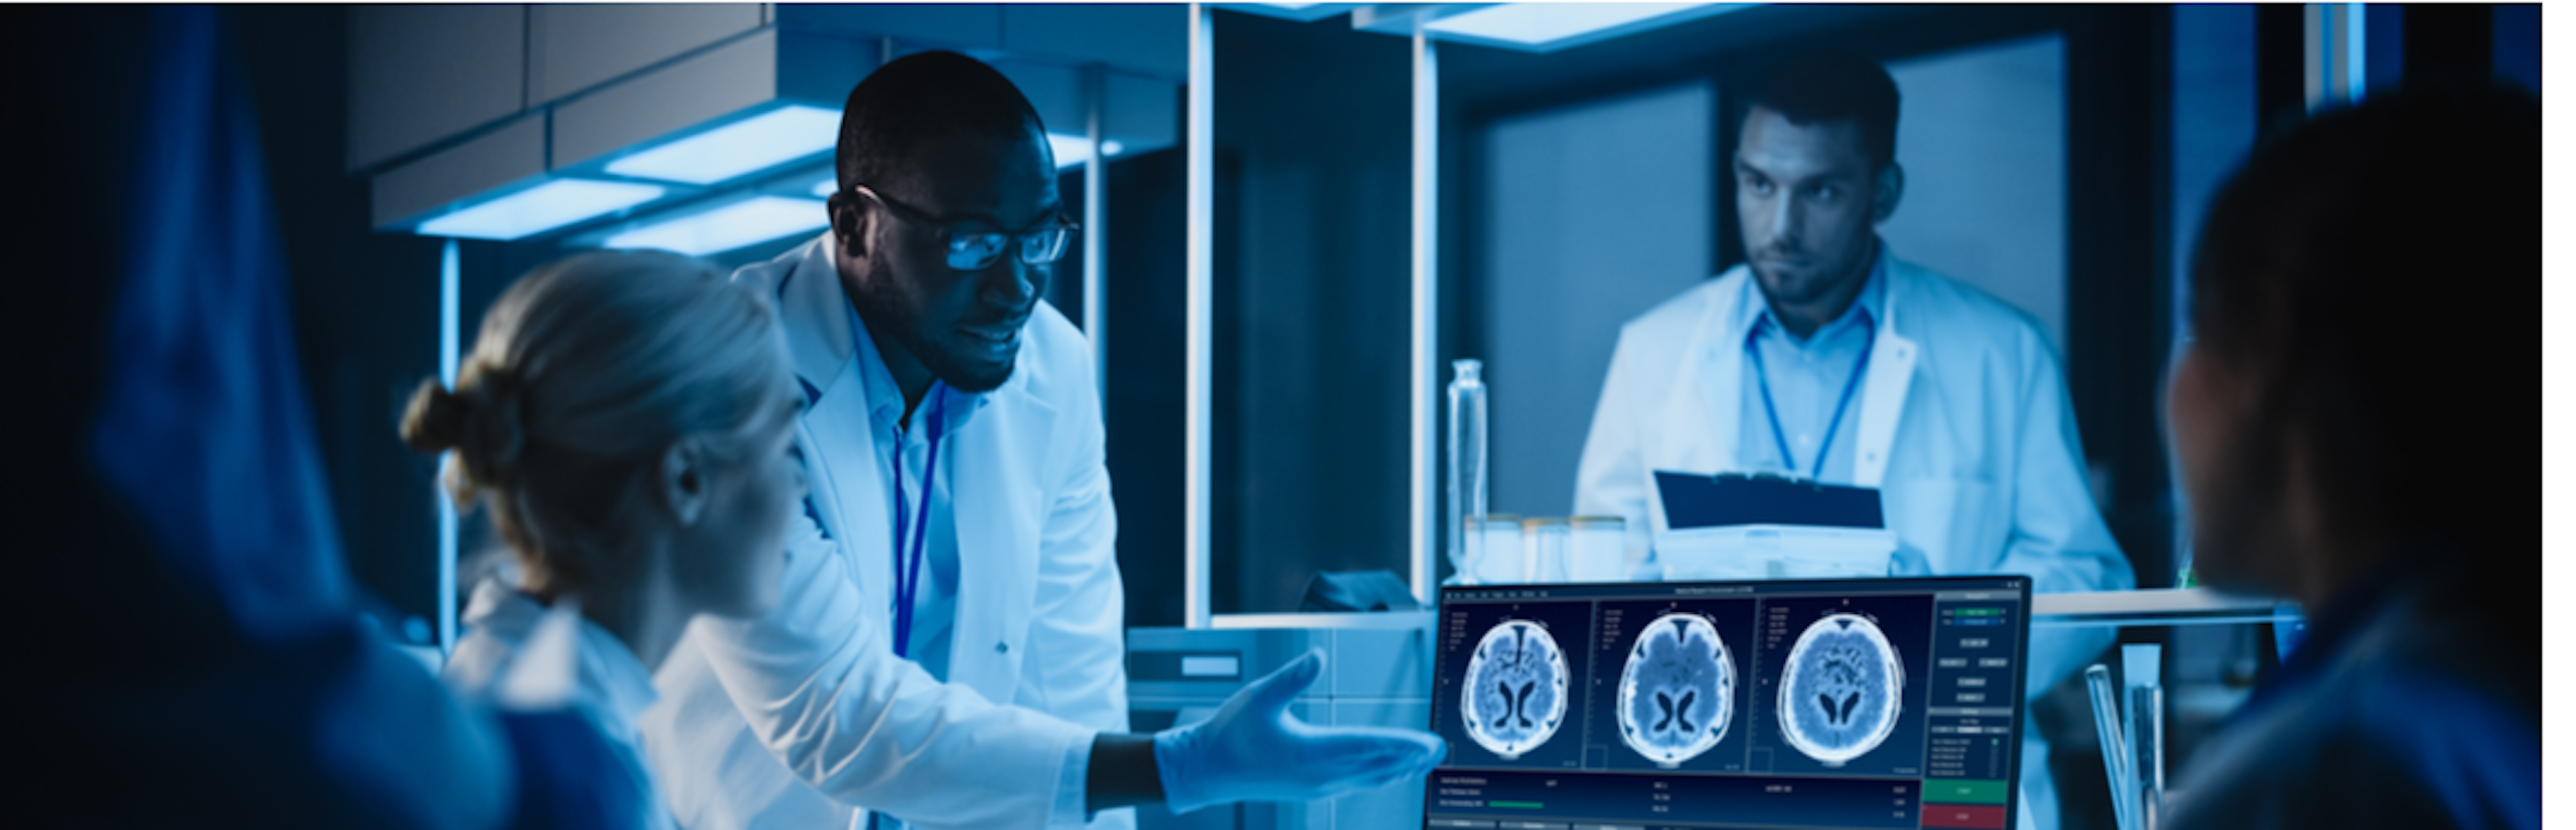 Black doctor directing team to observe brain scan